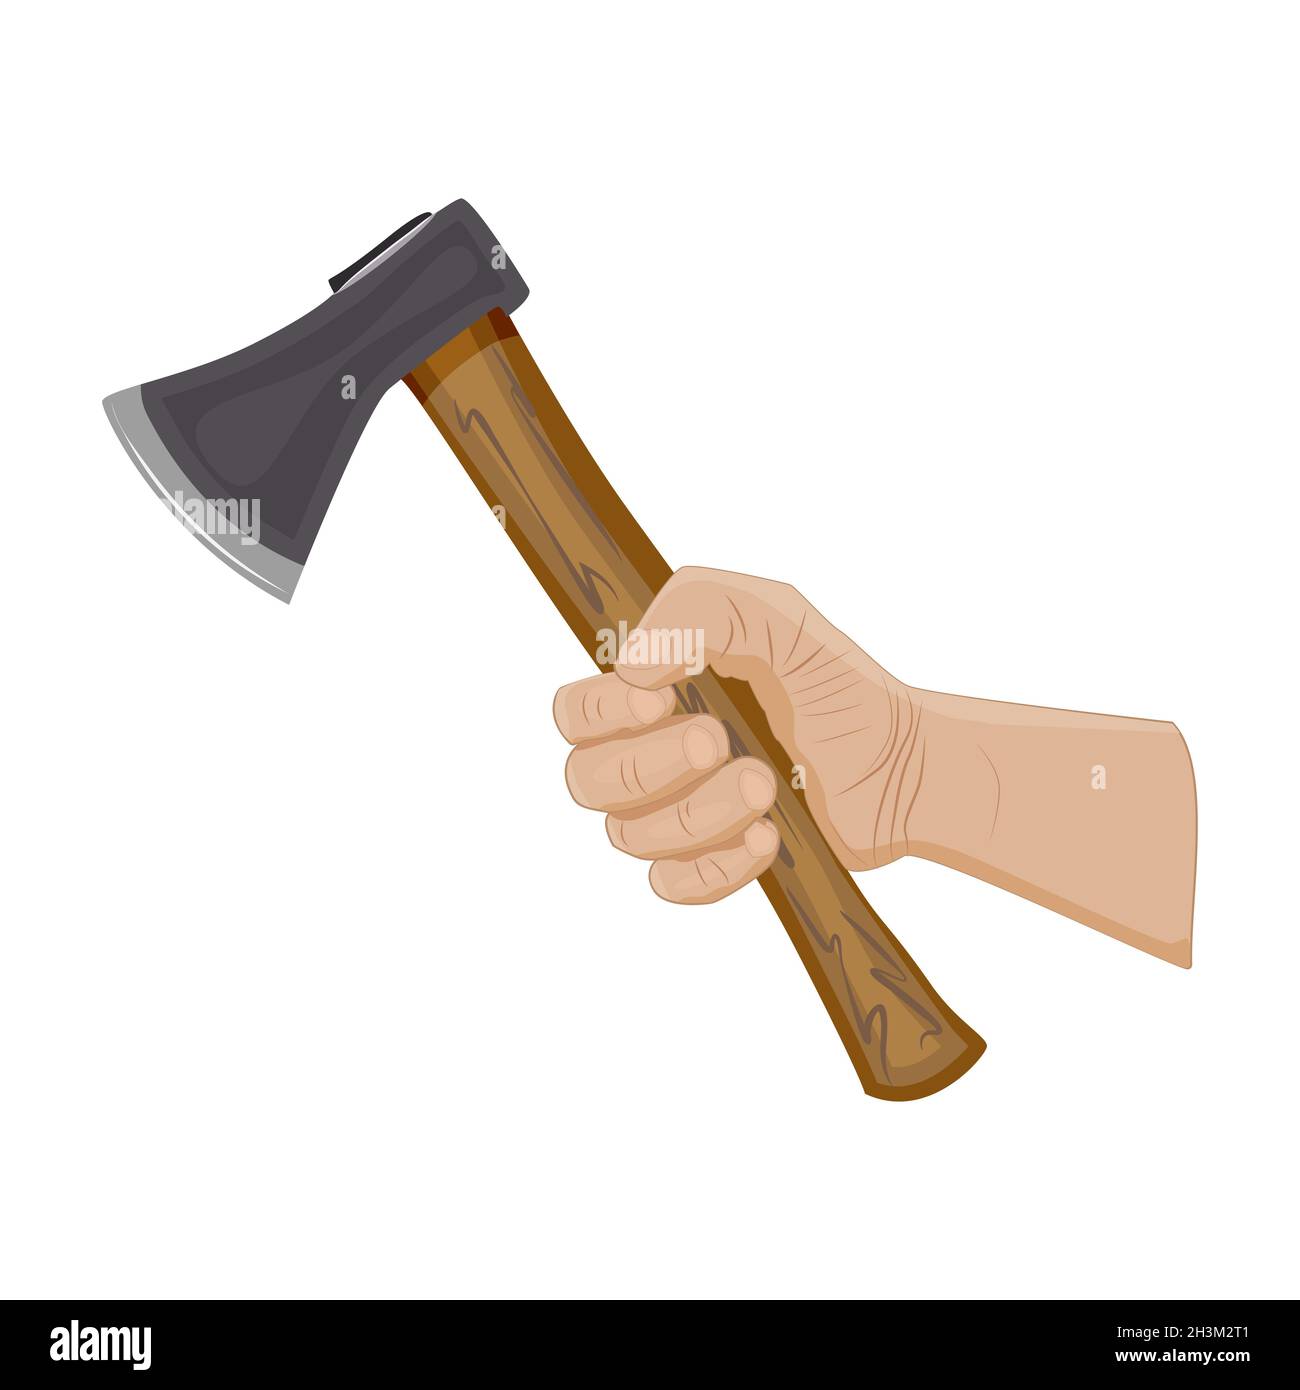 Hand holding axe isolated on white background. Woodcutter arm with ax. Lumberjack tool. Hatchet with wooden handle for wood work. Vector illustration Stock Vector